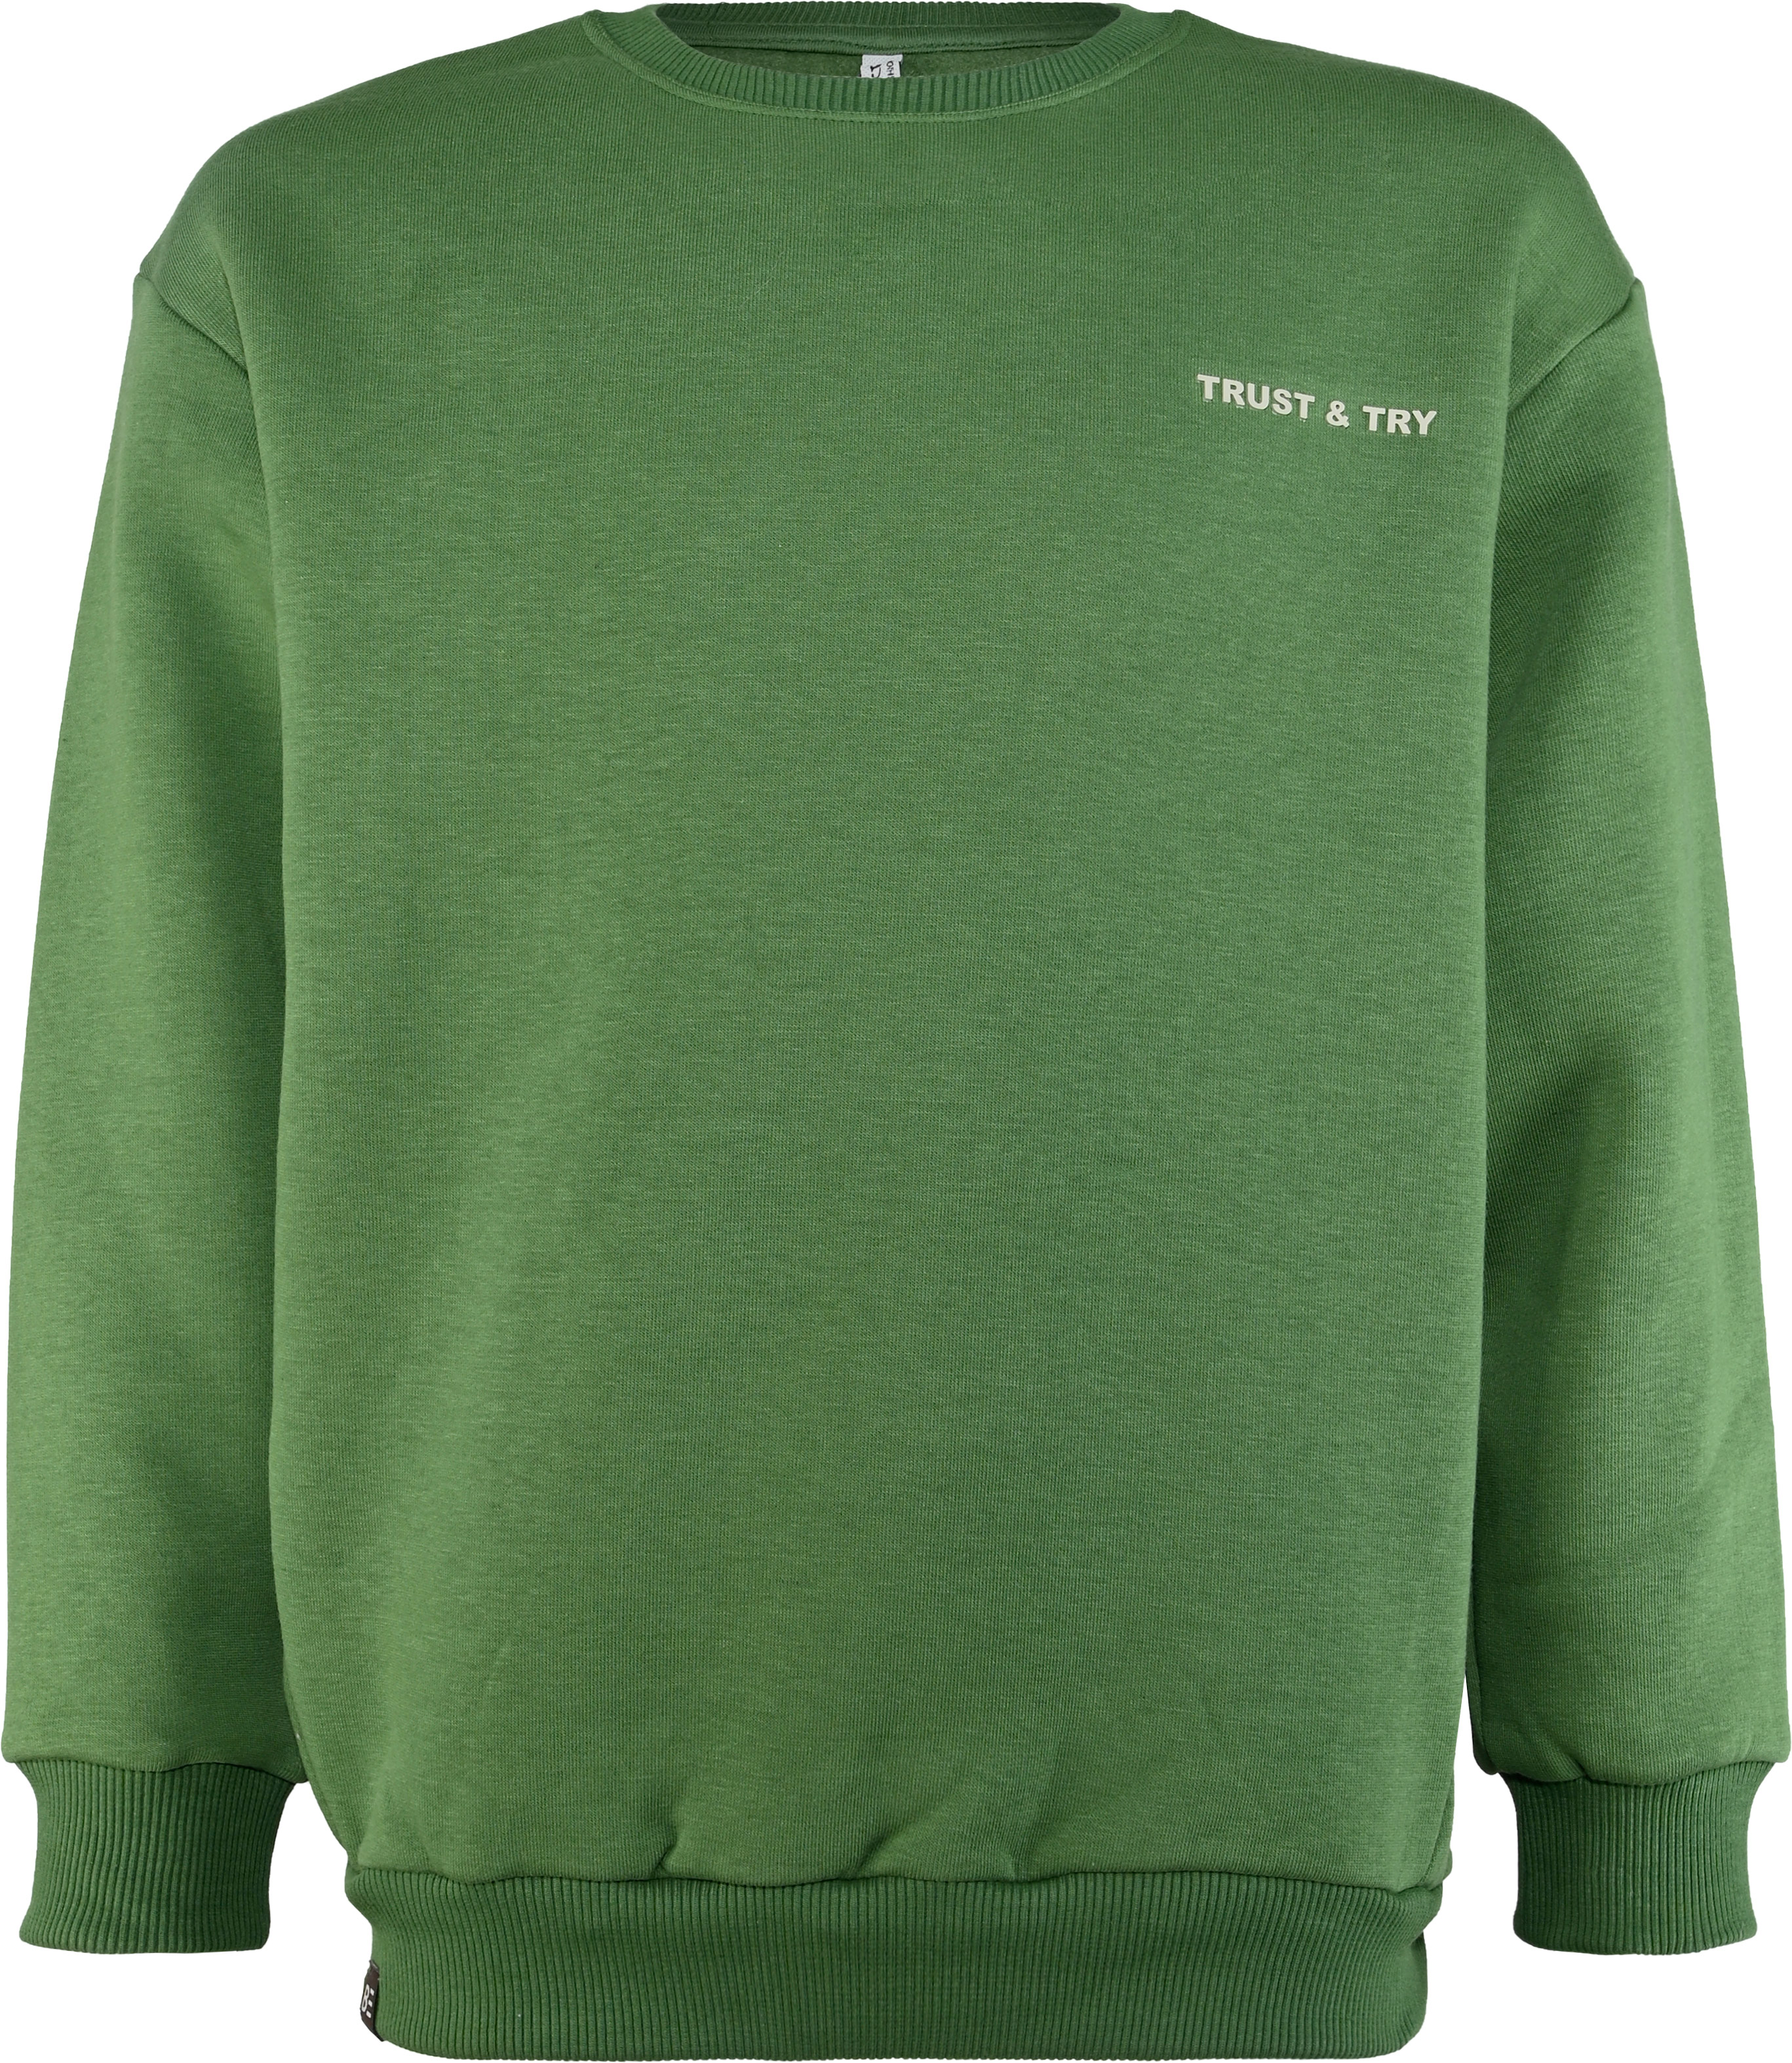 6325-Boys Oversized Sweatshirt -BE Trust and Try